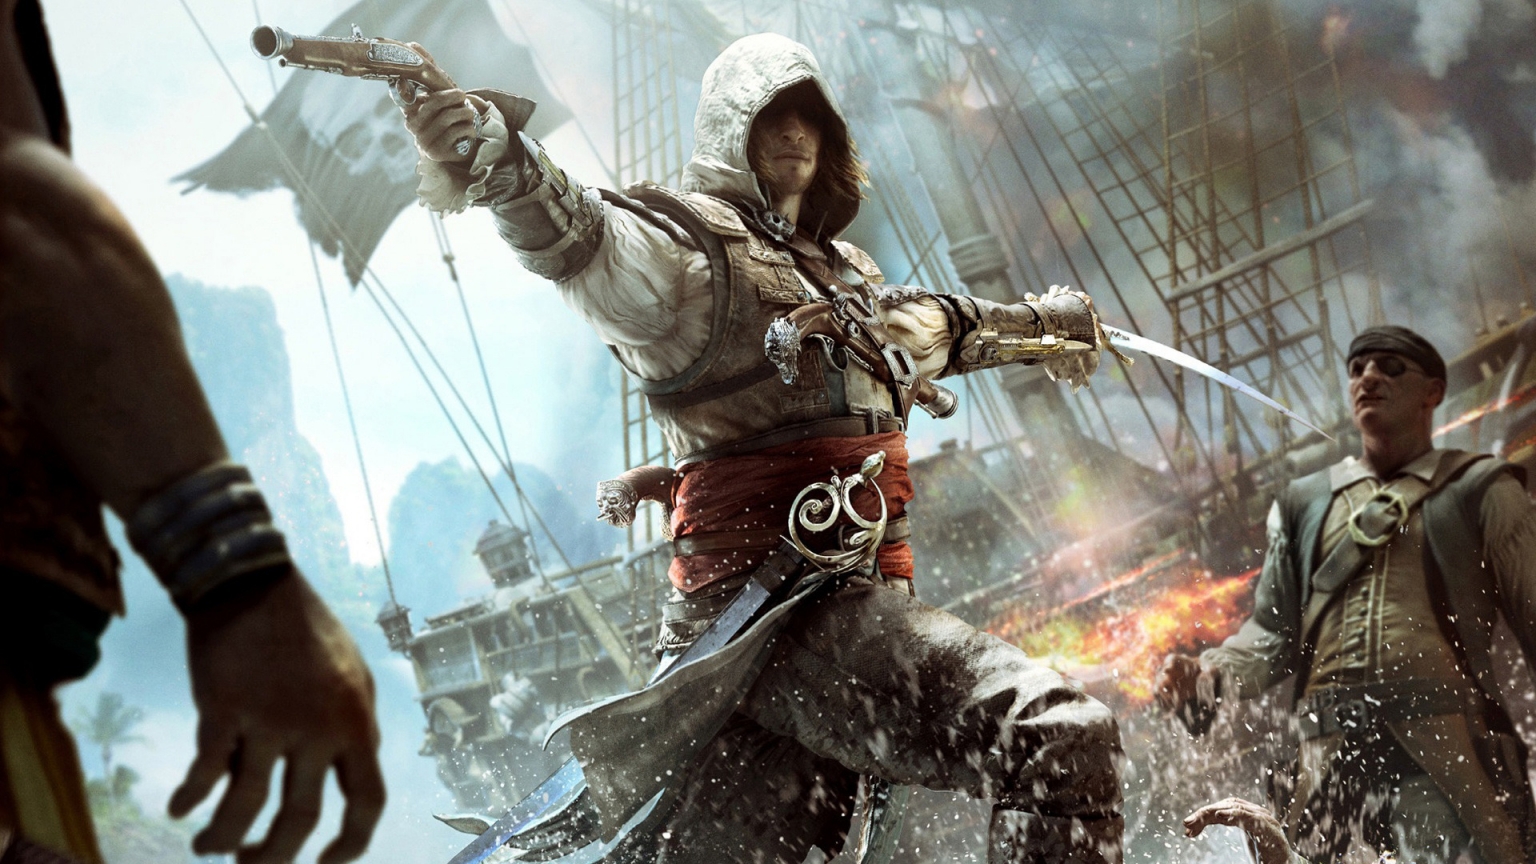 Assassin Creed 4 for 1536 x 864 HDTV resolution